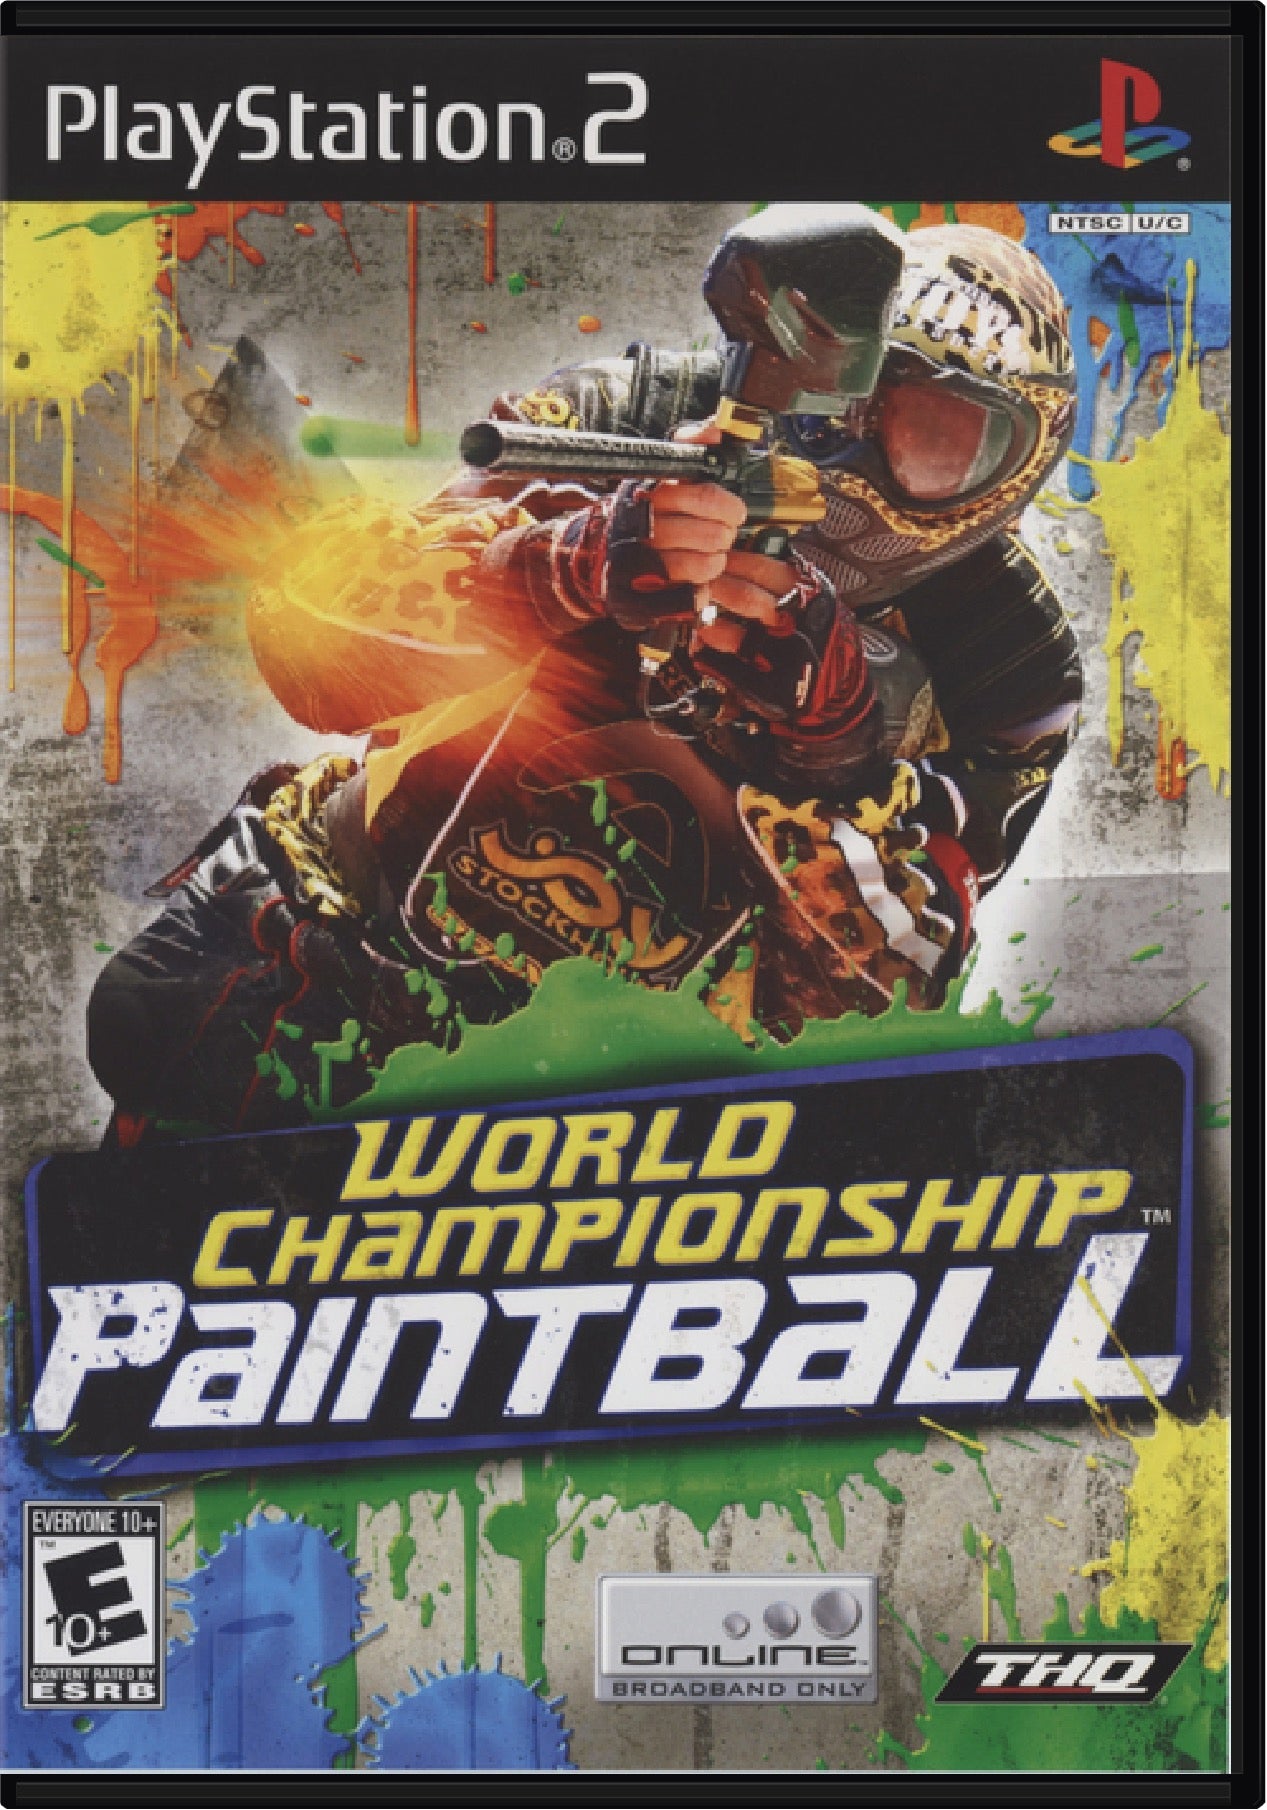 World Championship Paintball Cover Art and Product Photo